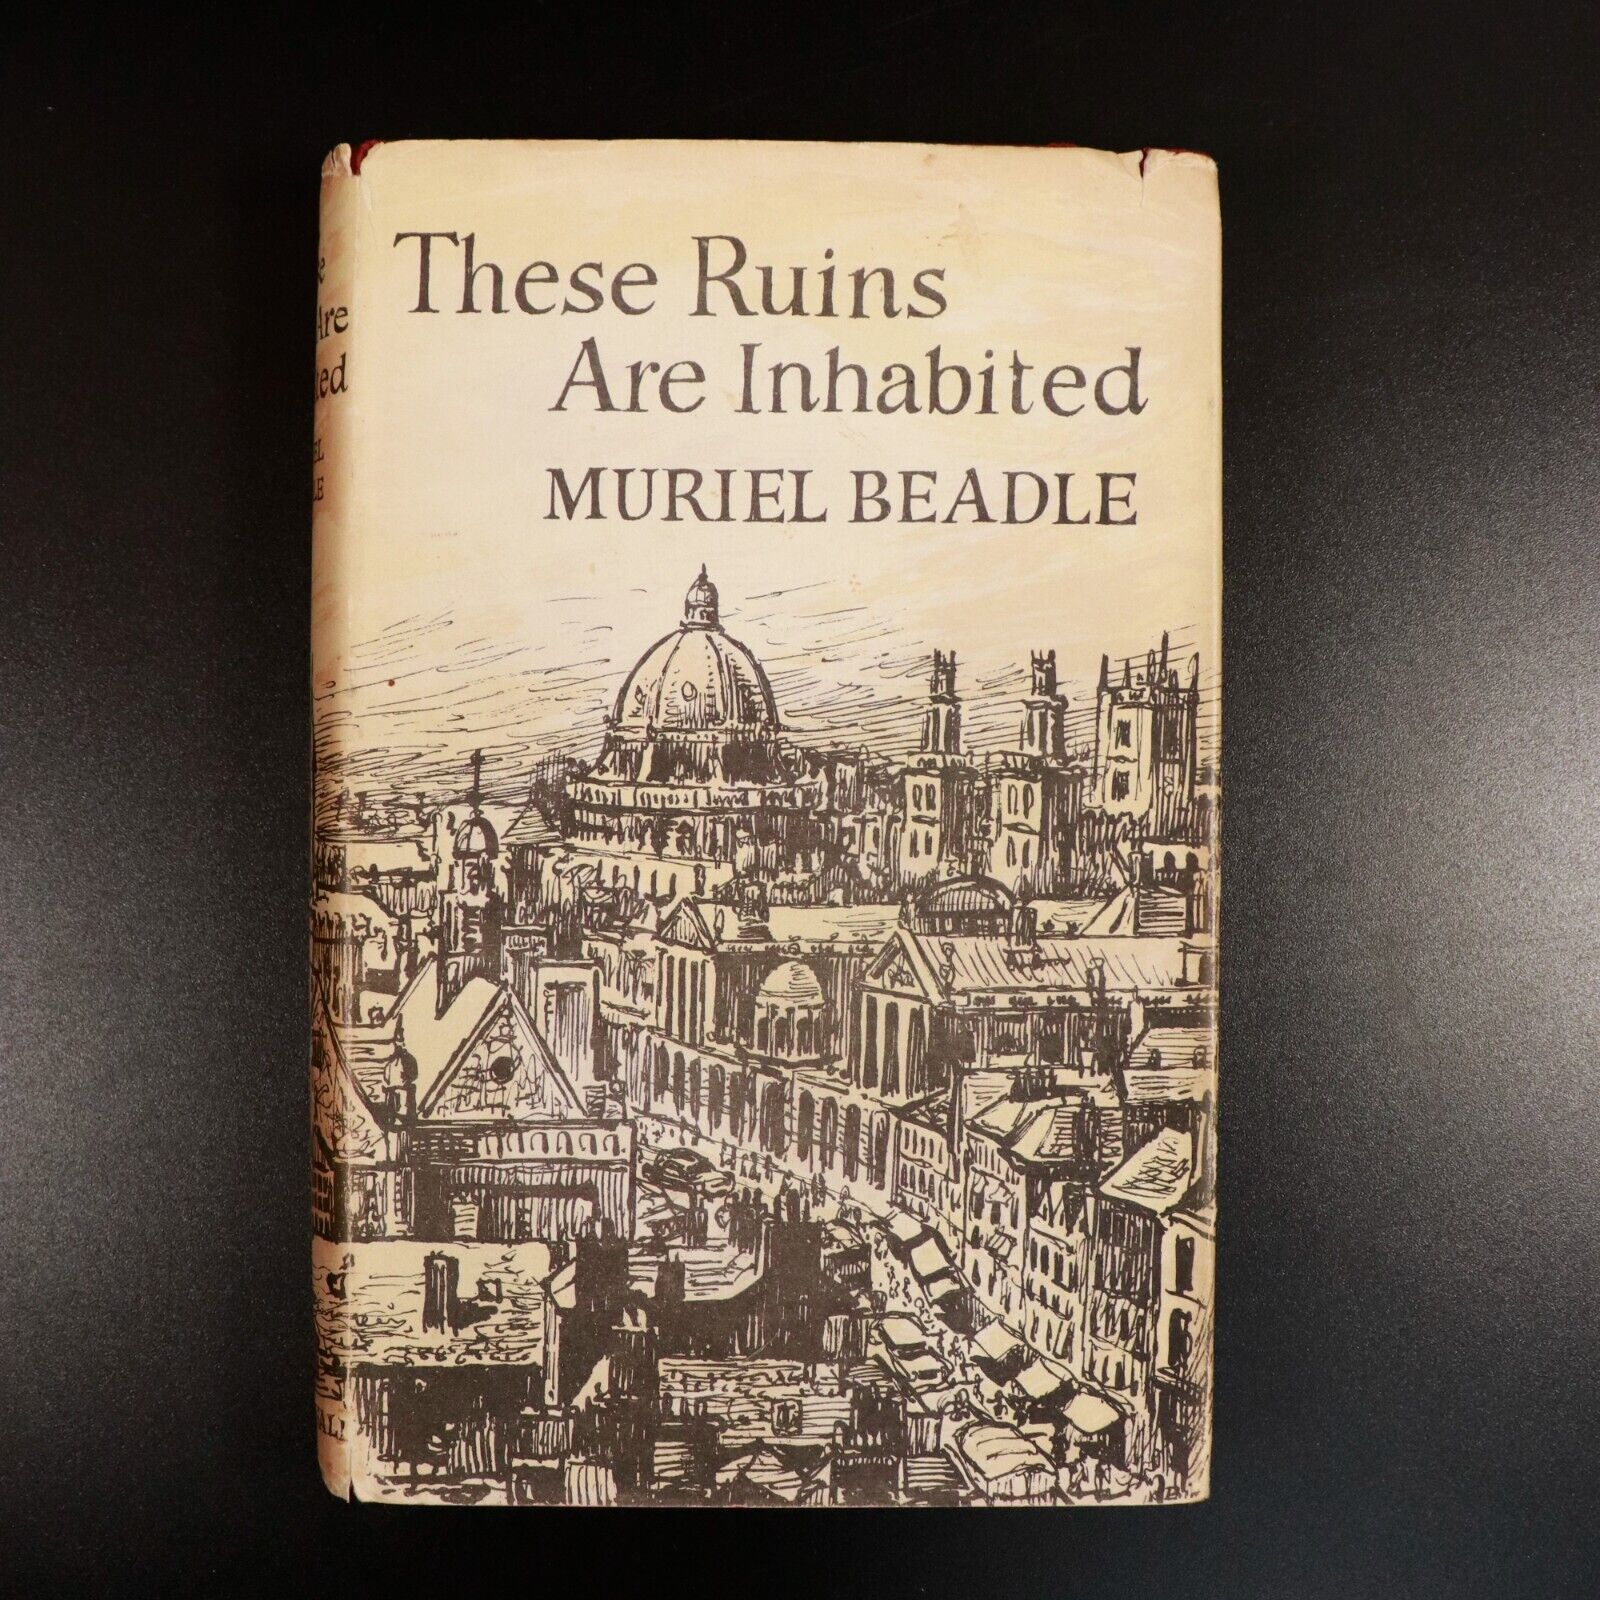 1966 These Ruins Are Inhabited by Muriel Beadle Vintage British Travel Book